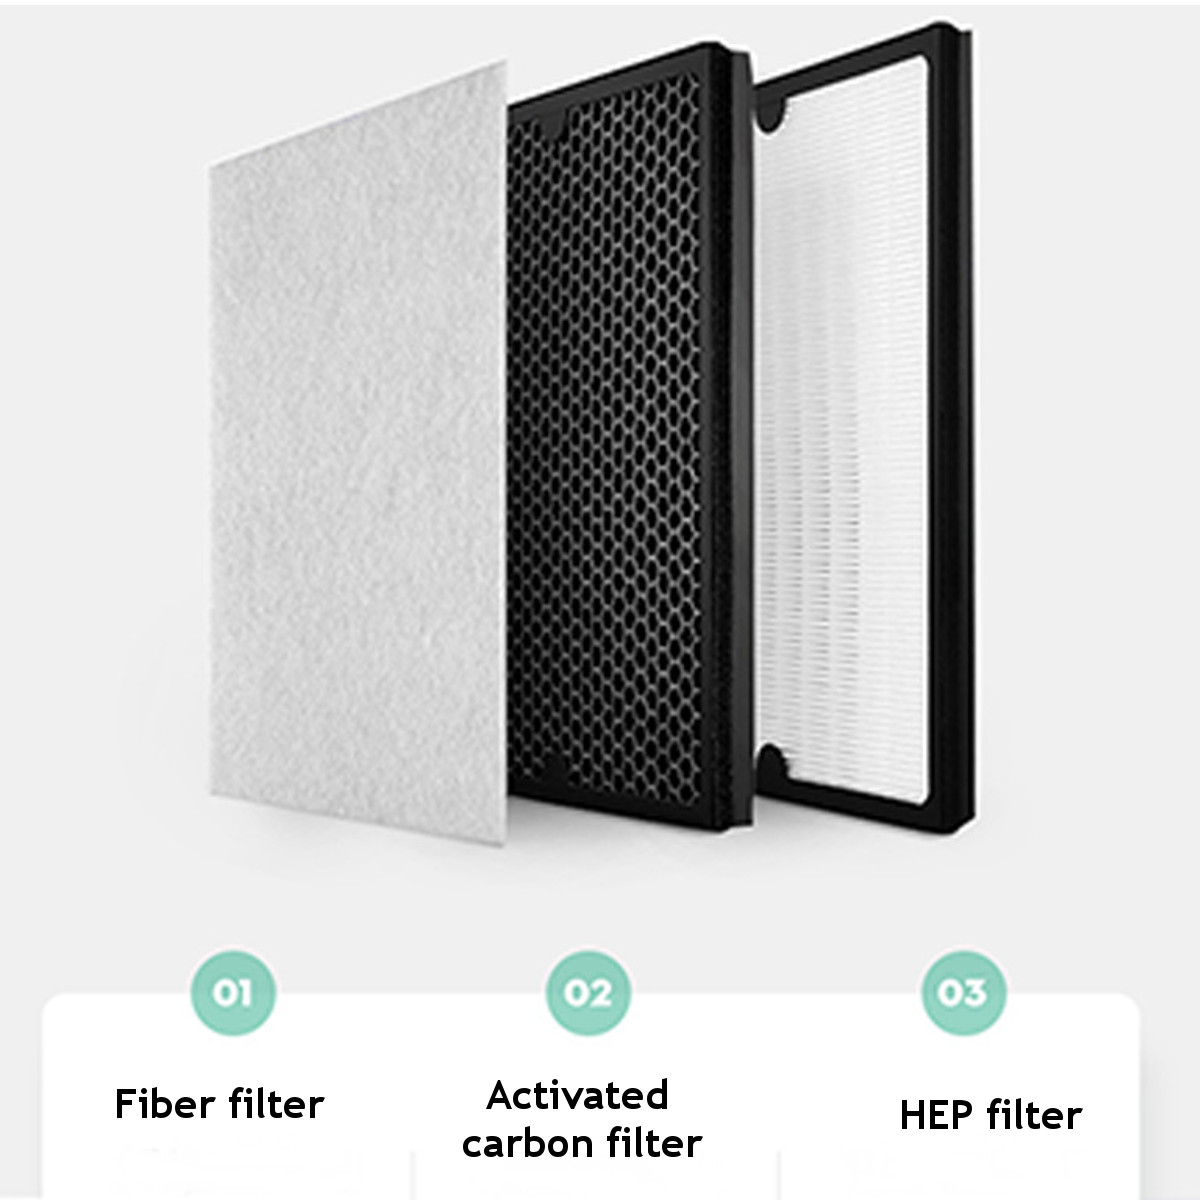 Air-Purifier-650msup3H-HEPA-Filter-Home-Germ-Smoke-Dust-Cleaner-w-Remote-Control-Air-Filter-Air-Clea-1631975-7